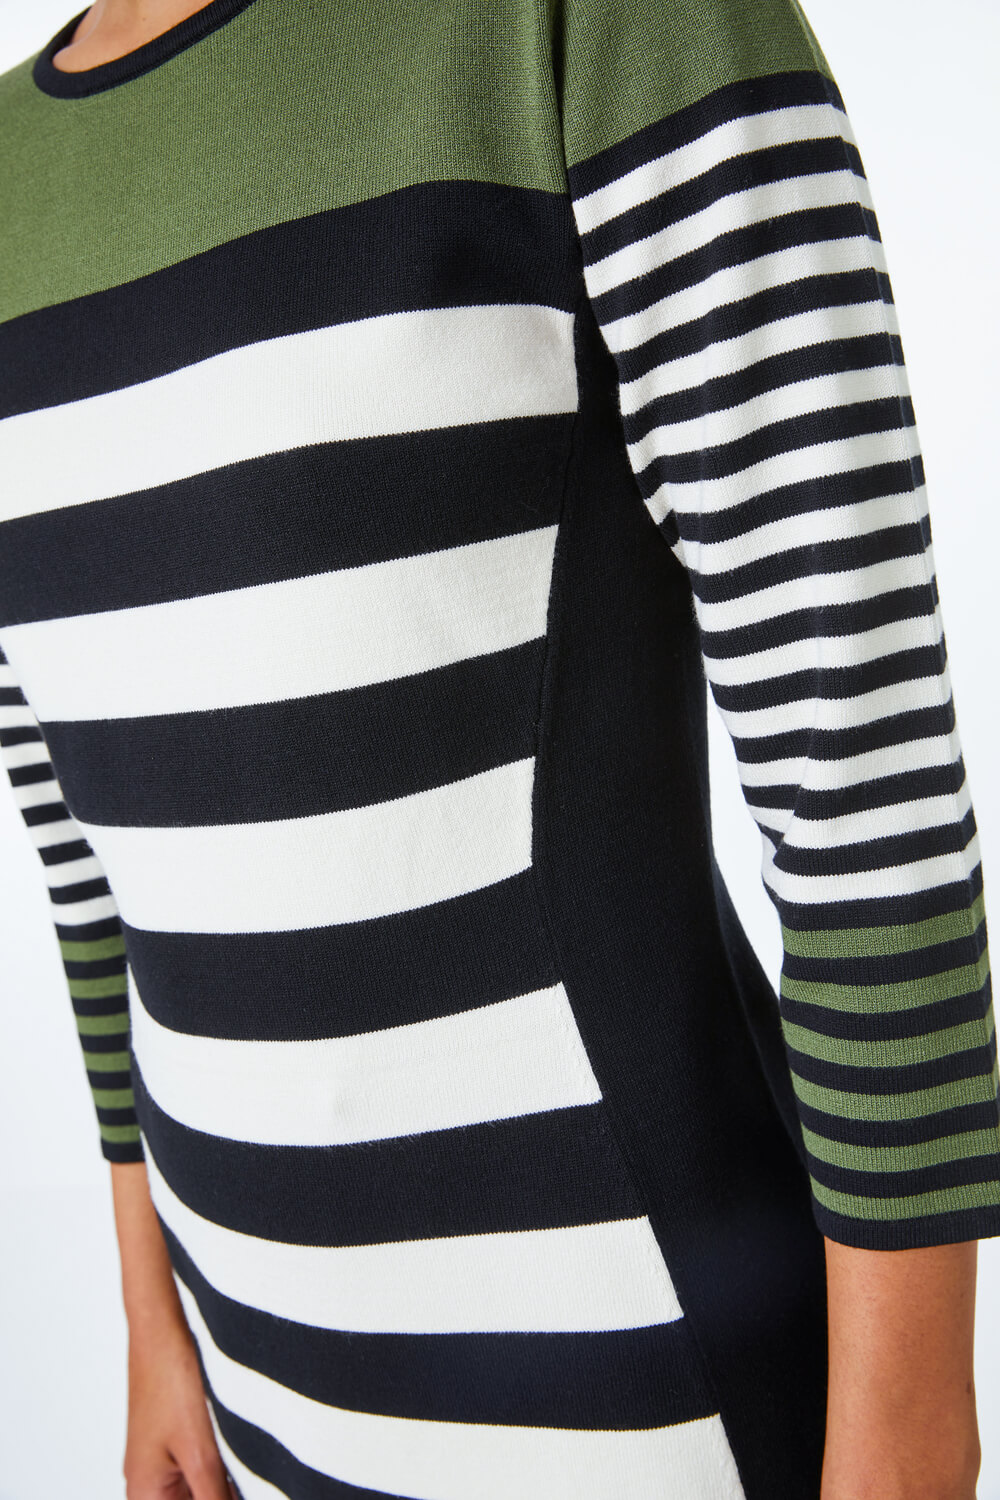 Olive Colour Block Knitted Stripe Dress, Image 5 of 5